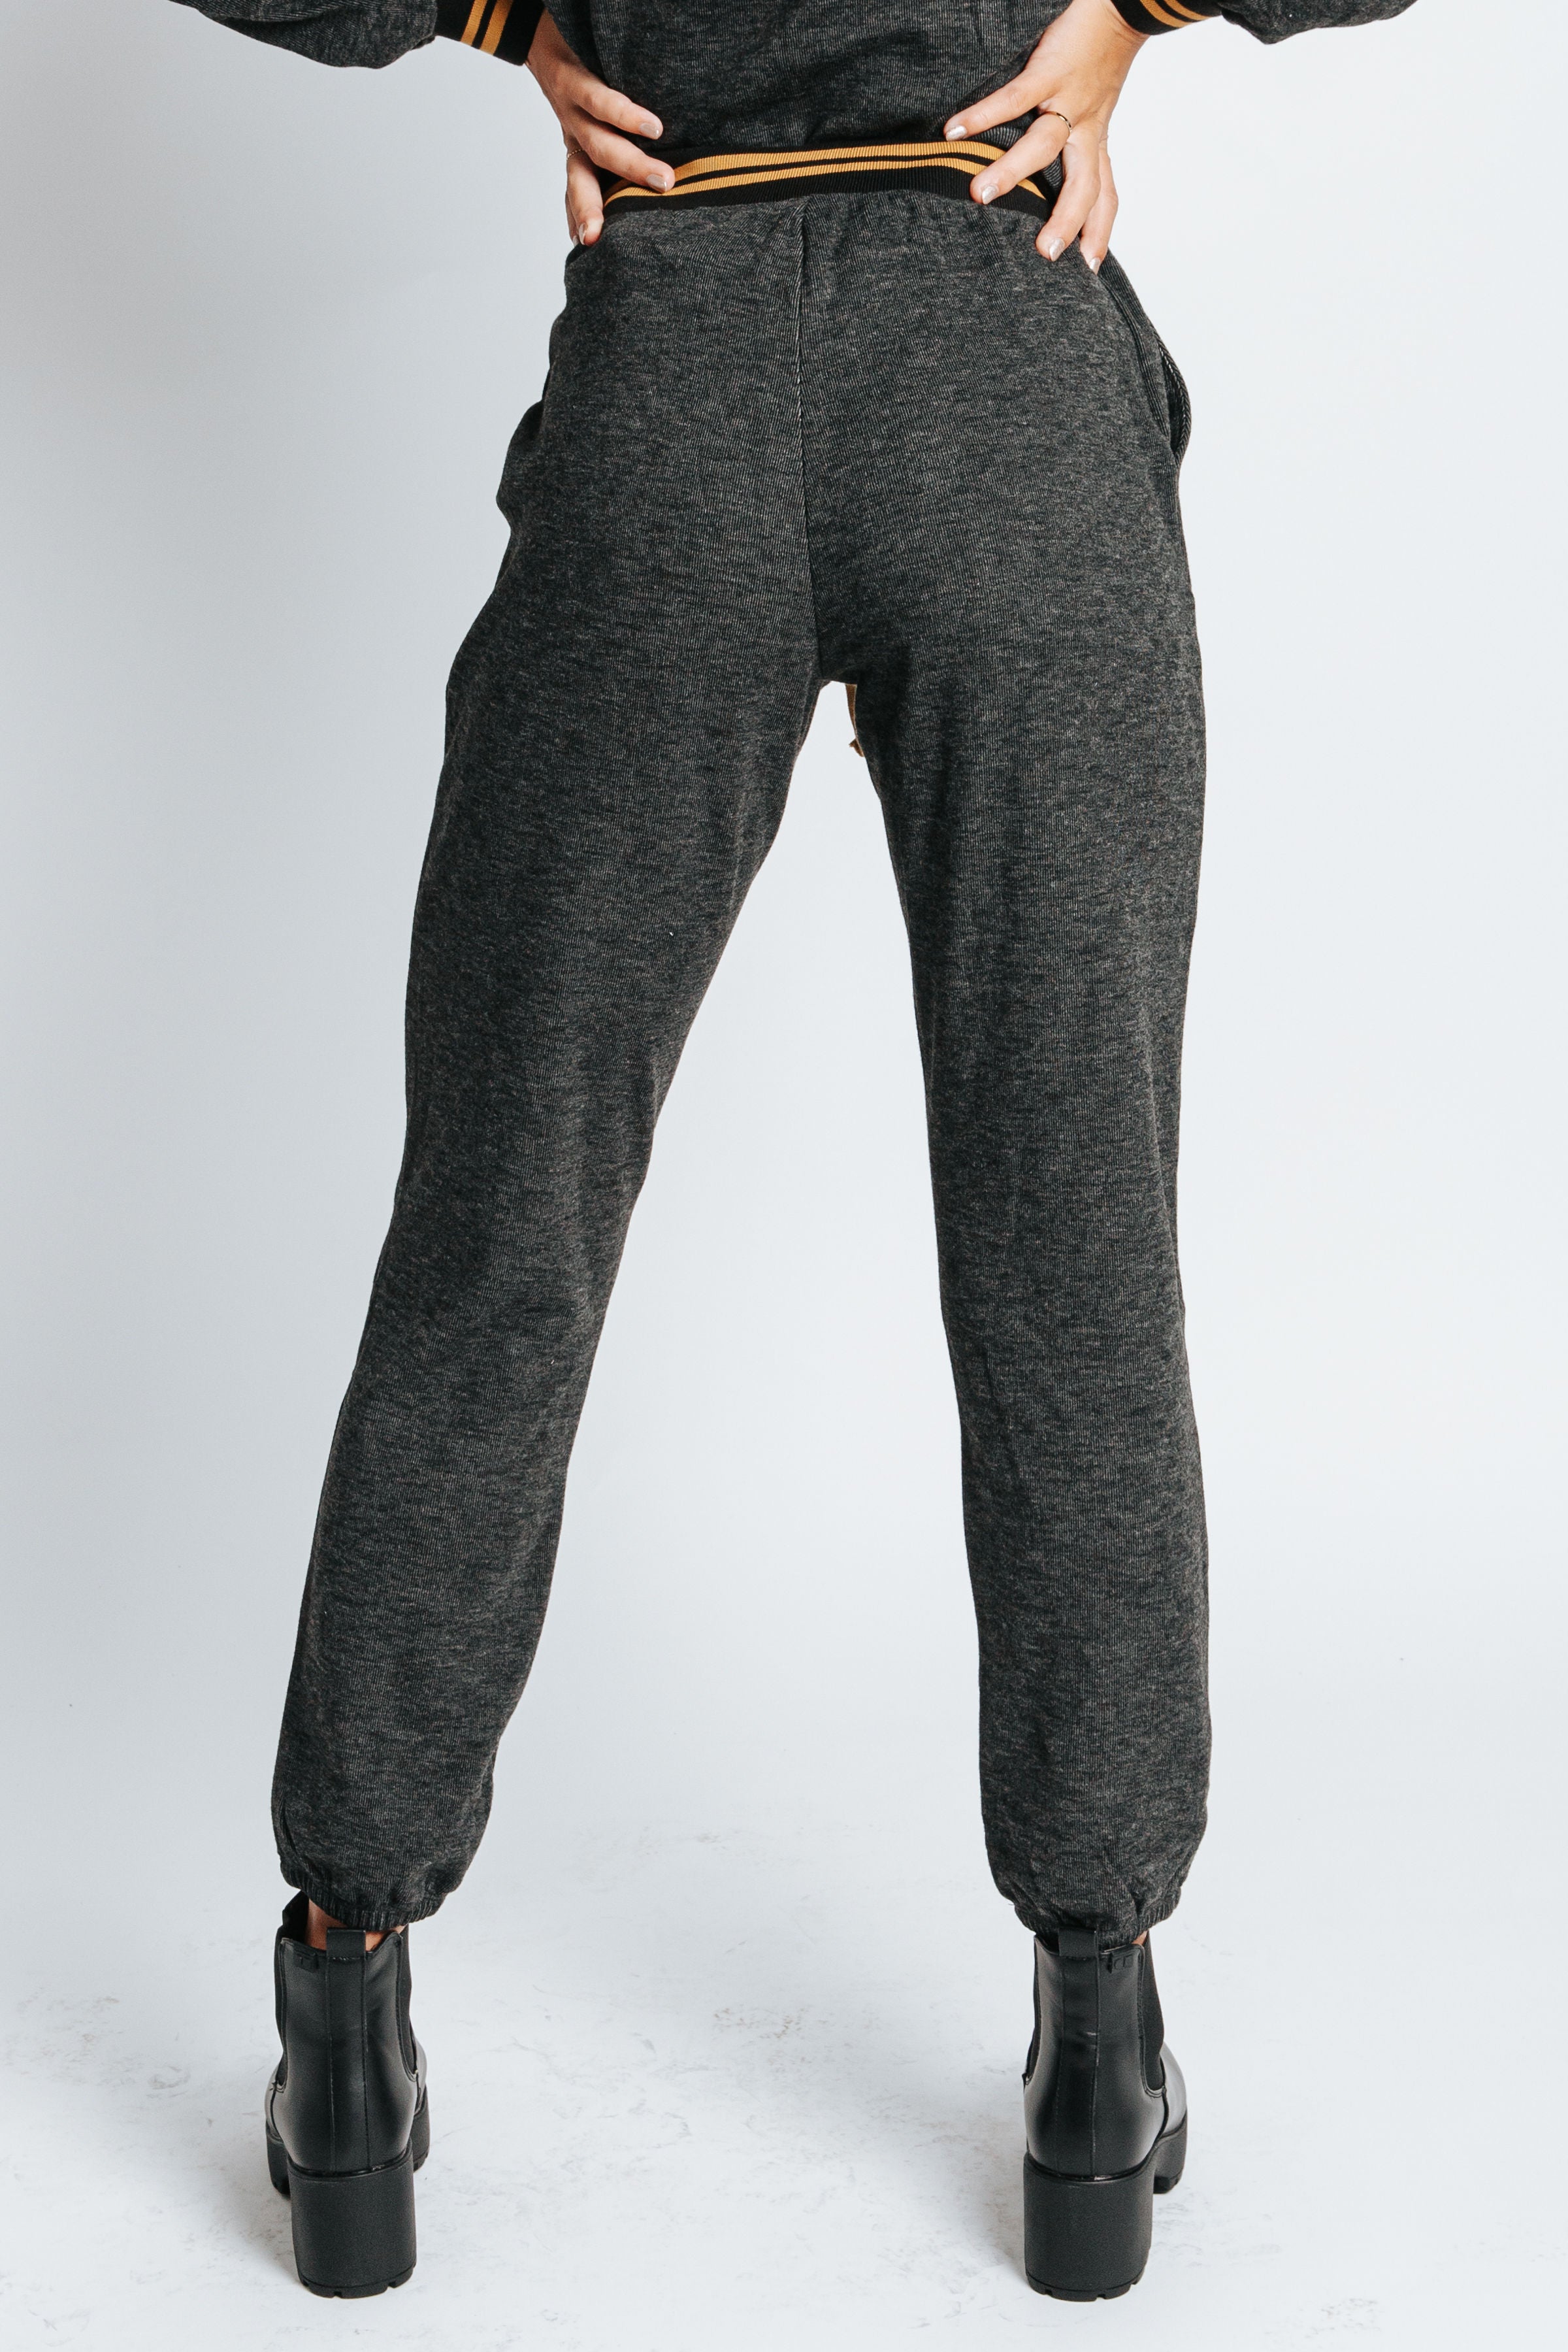 The Ernie Striped Detail Sweatpants in Charcoal